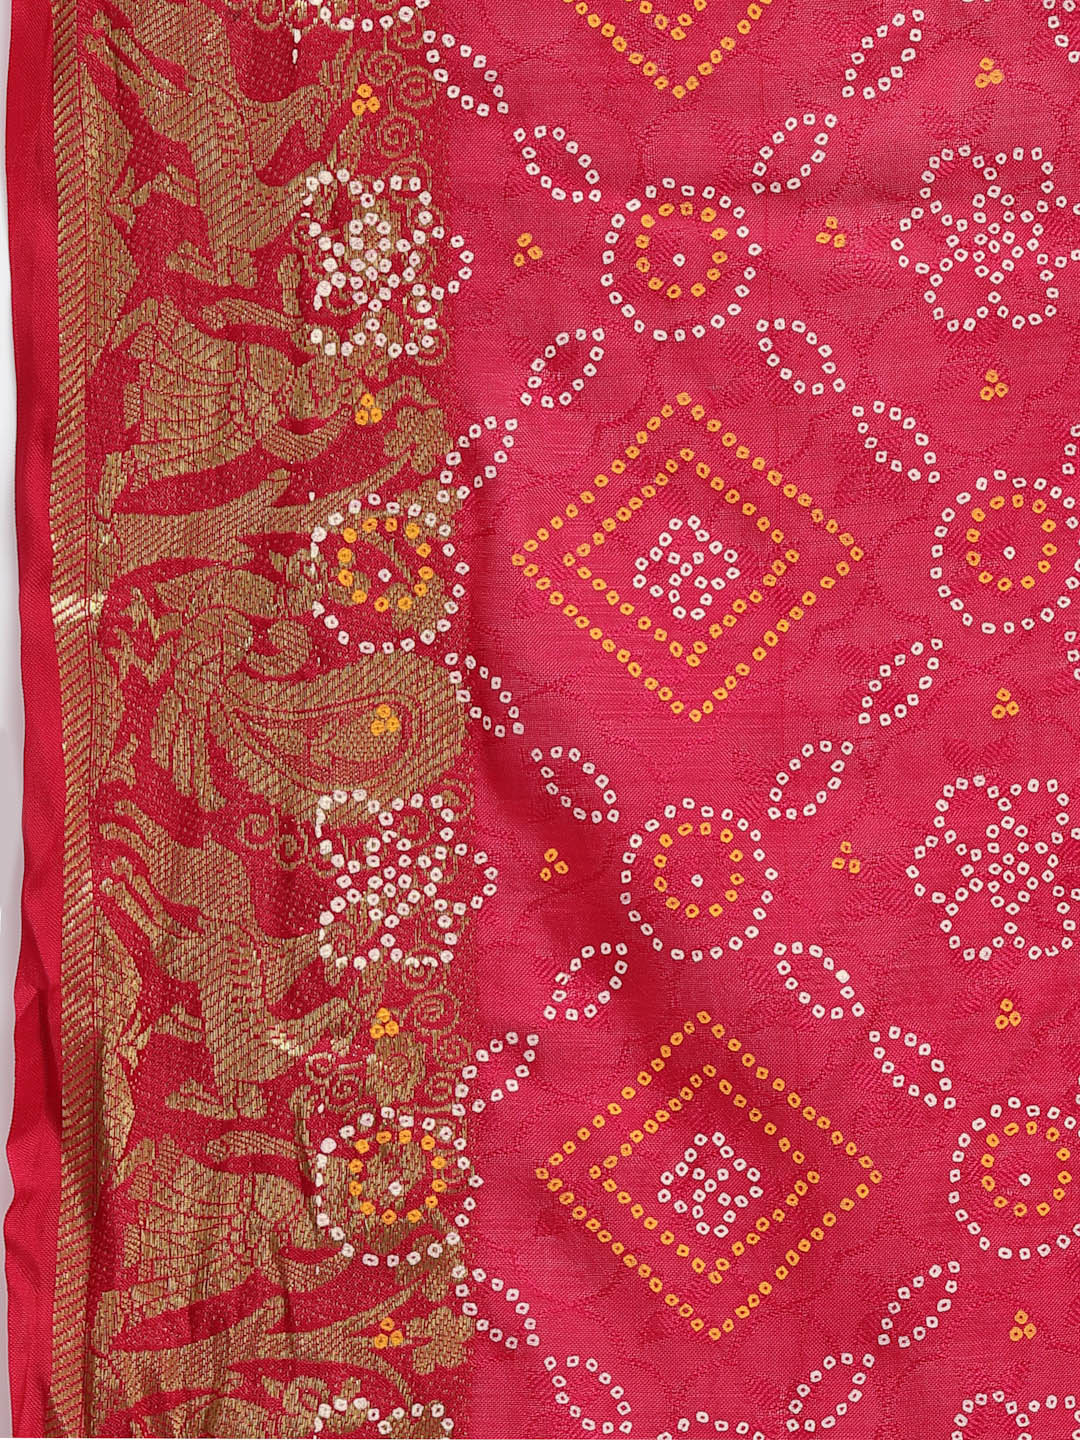 Women Bandhani Print With Zari Weaving Silk Saree And Blouse Pink with Unstitched